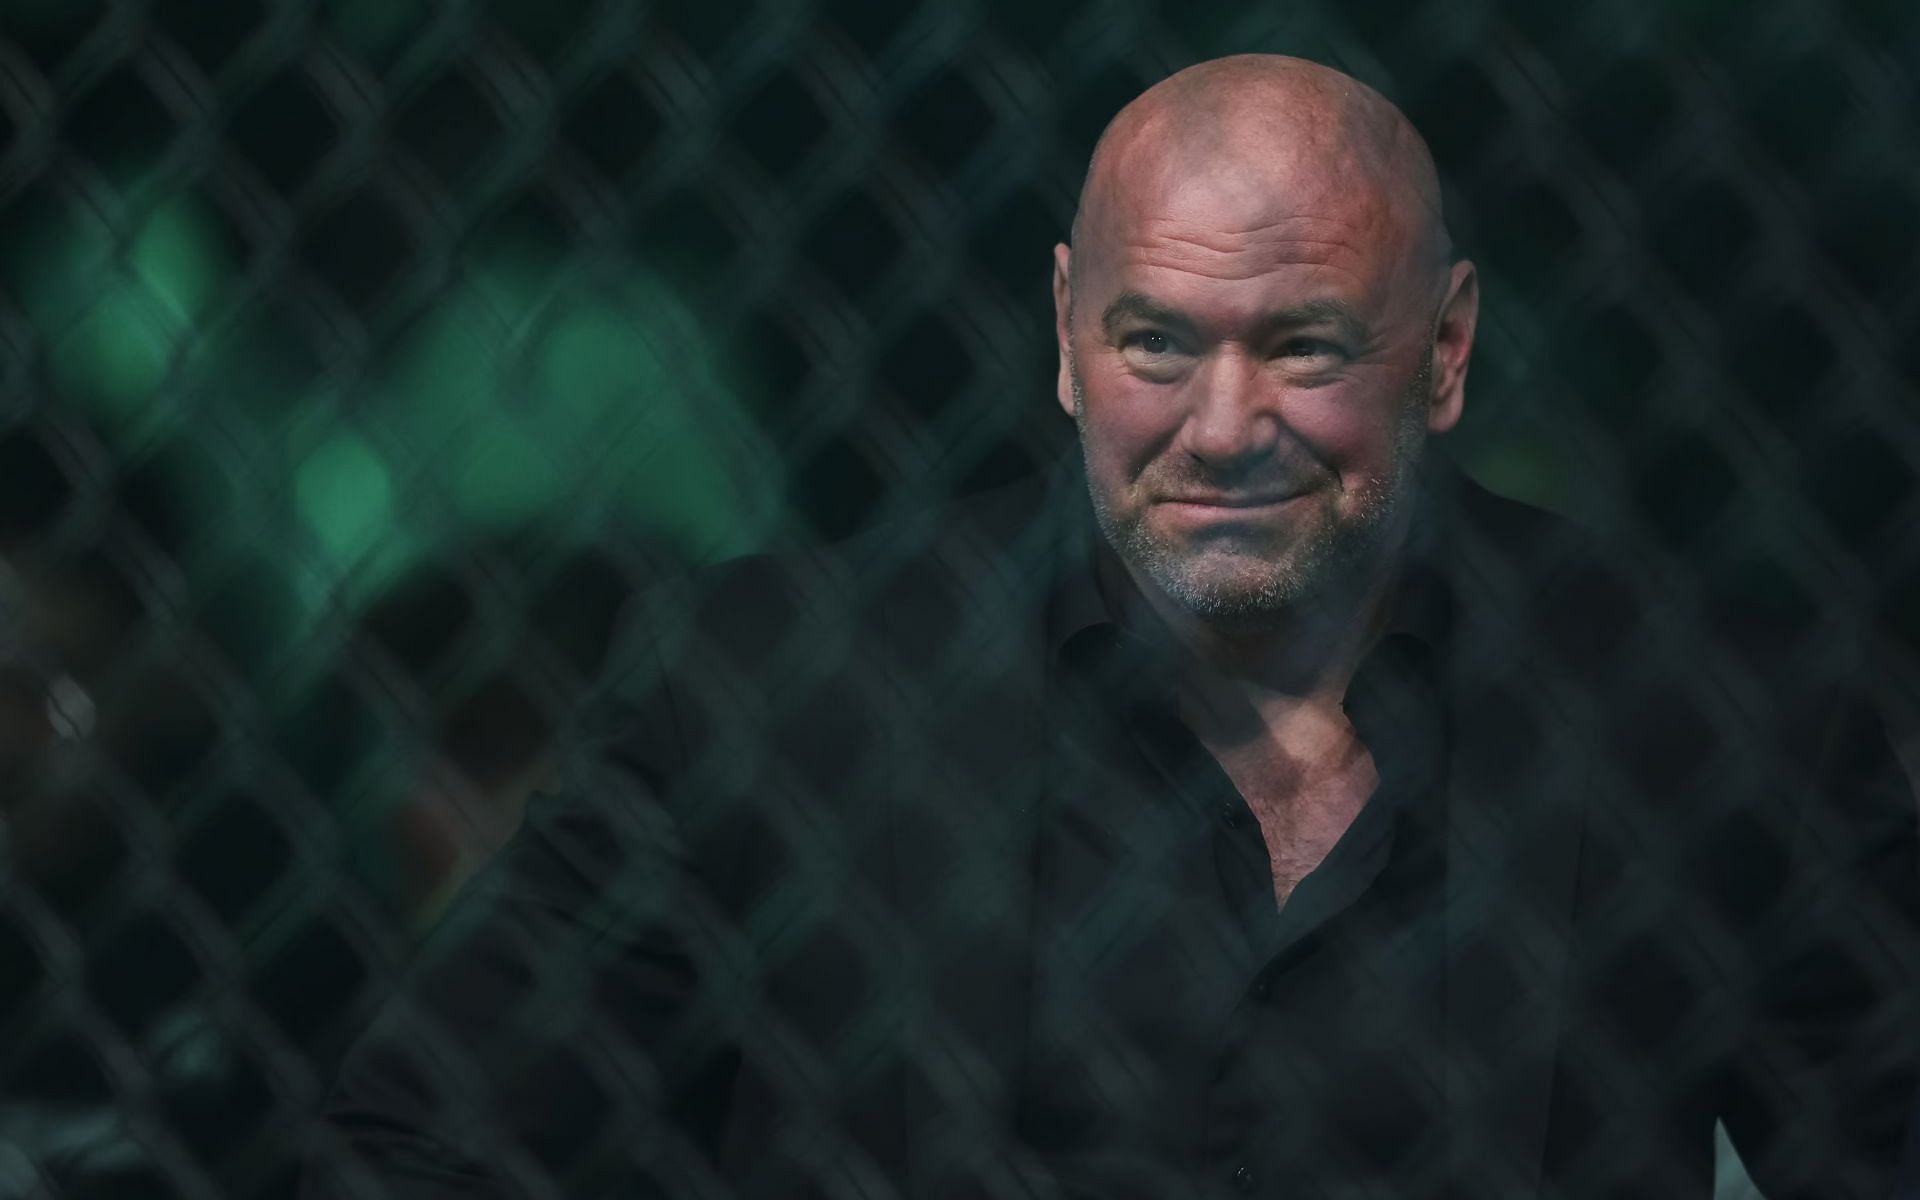 Is Dana White good or bad for the UFC?